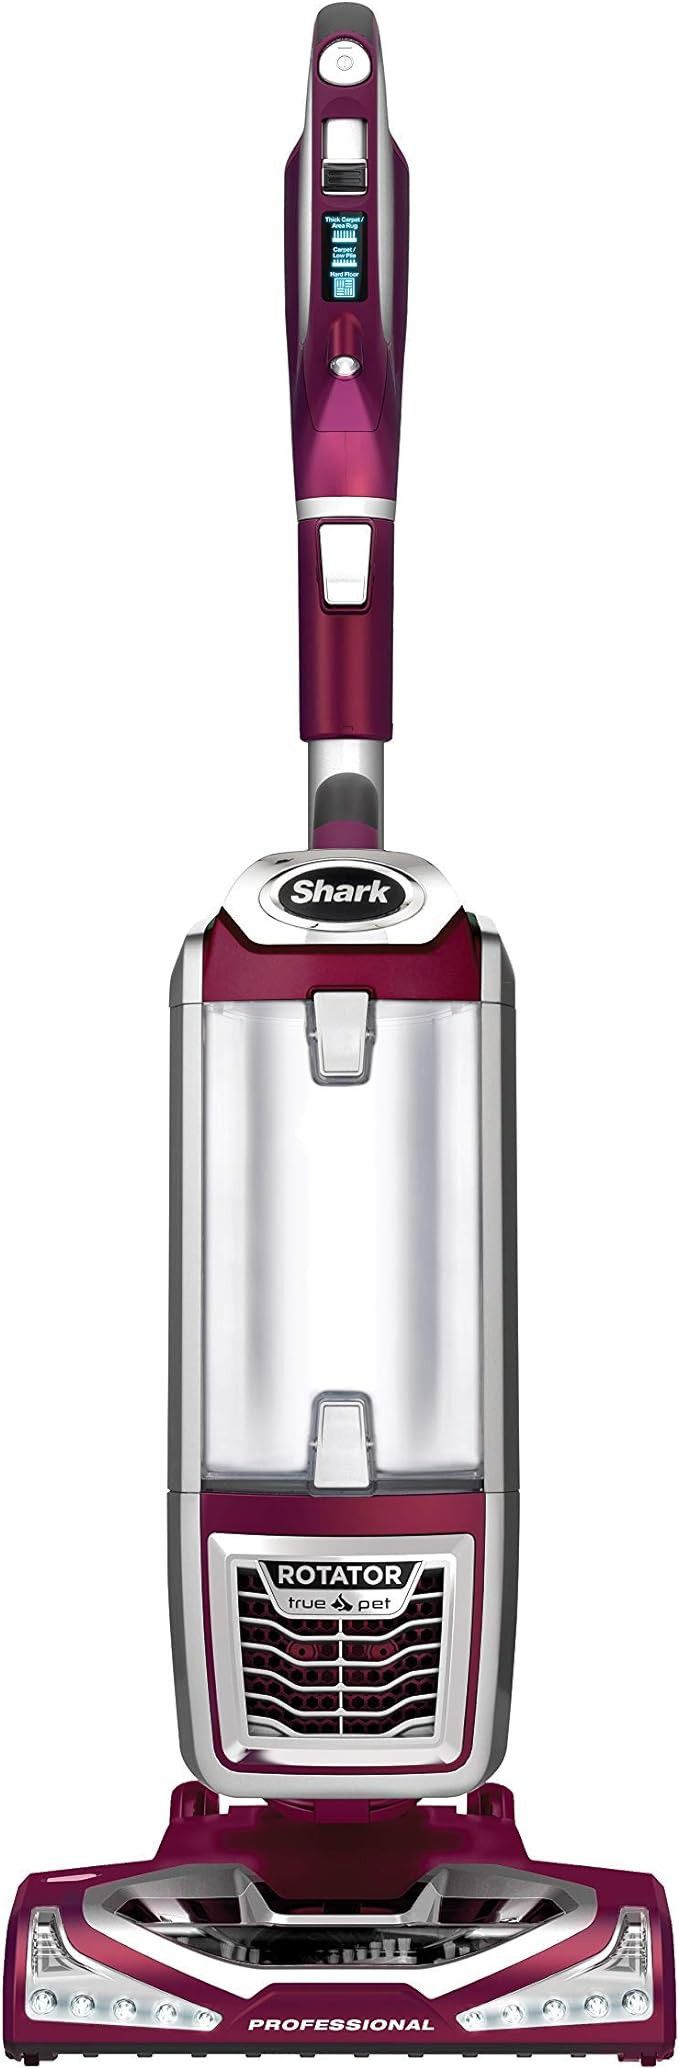 Shark NV752 Rotator Powered Lift-Away TruePet Upright Vacuum with HEPA Filter, Large Dust Cup Capacity, LED Headlights, Upholstery Tool, Perfect Pet